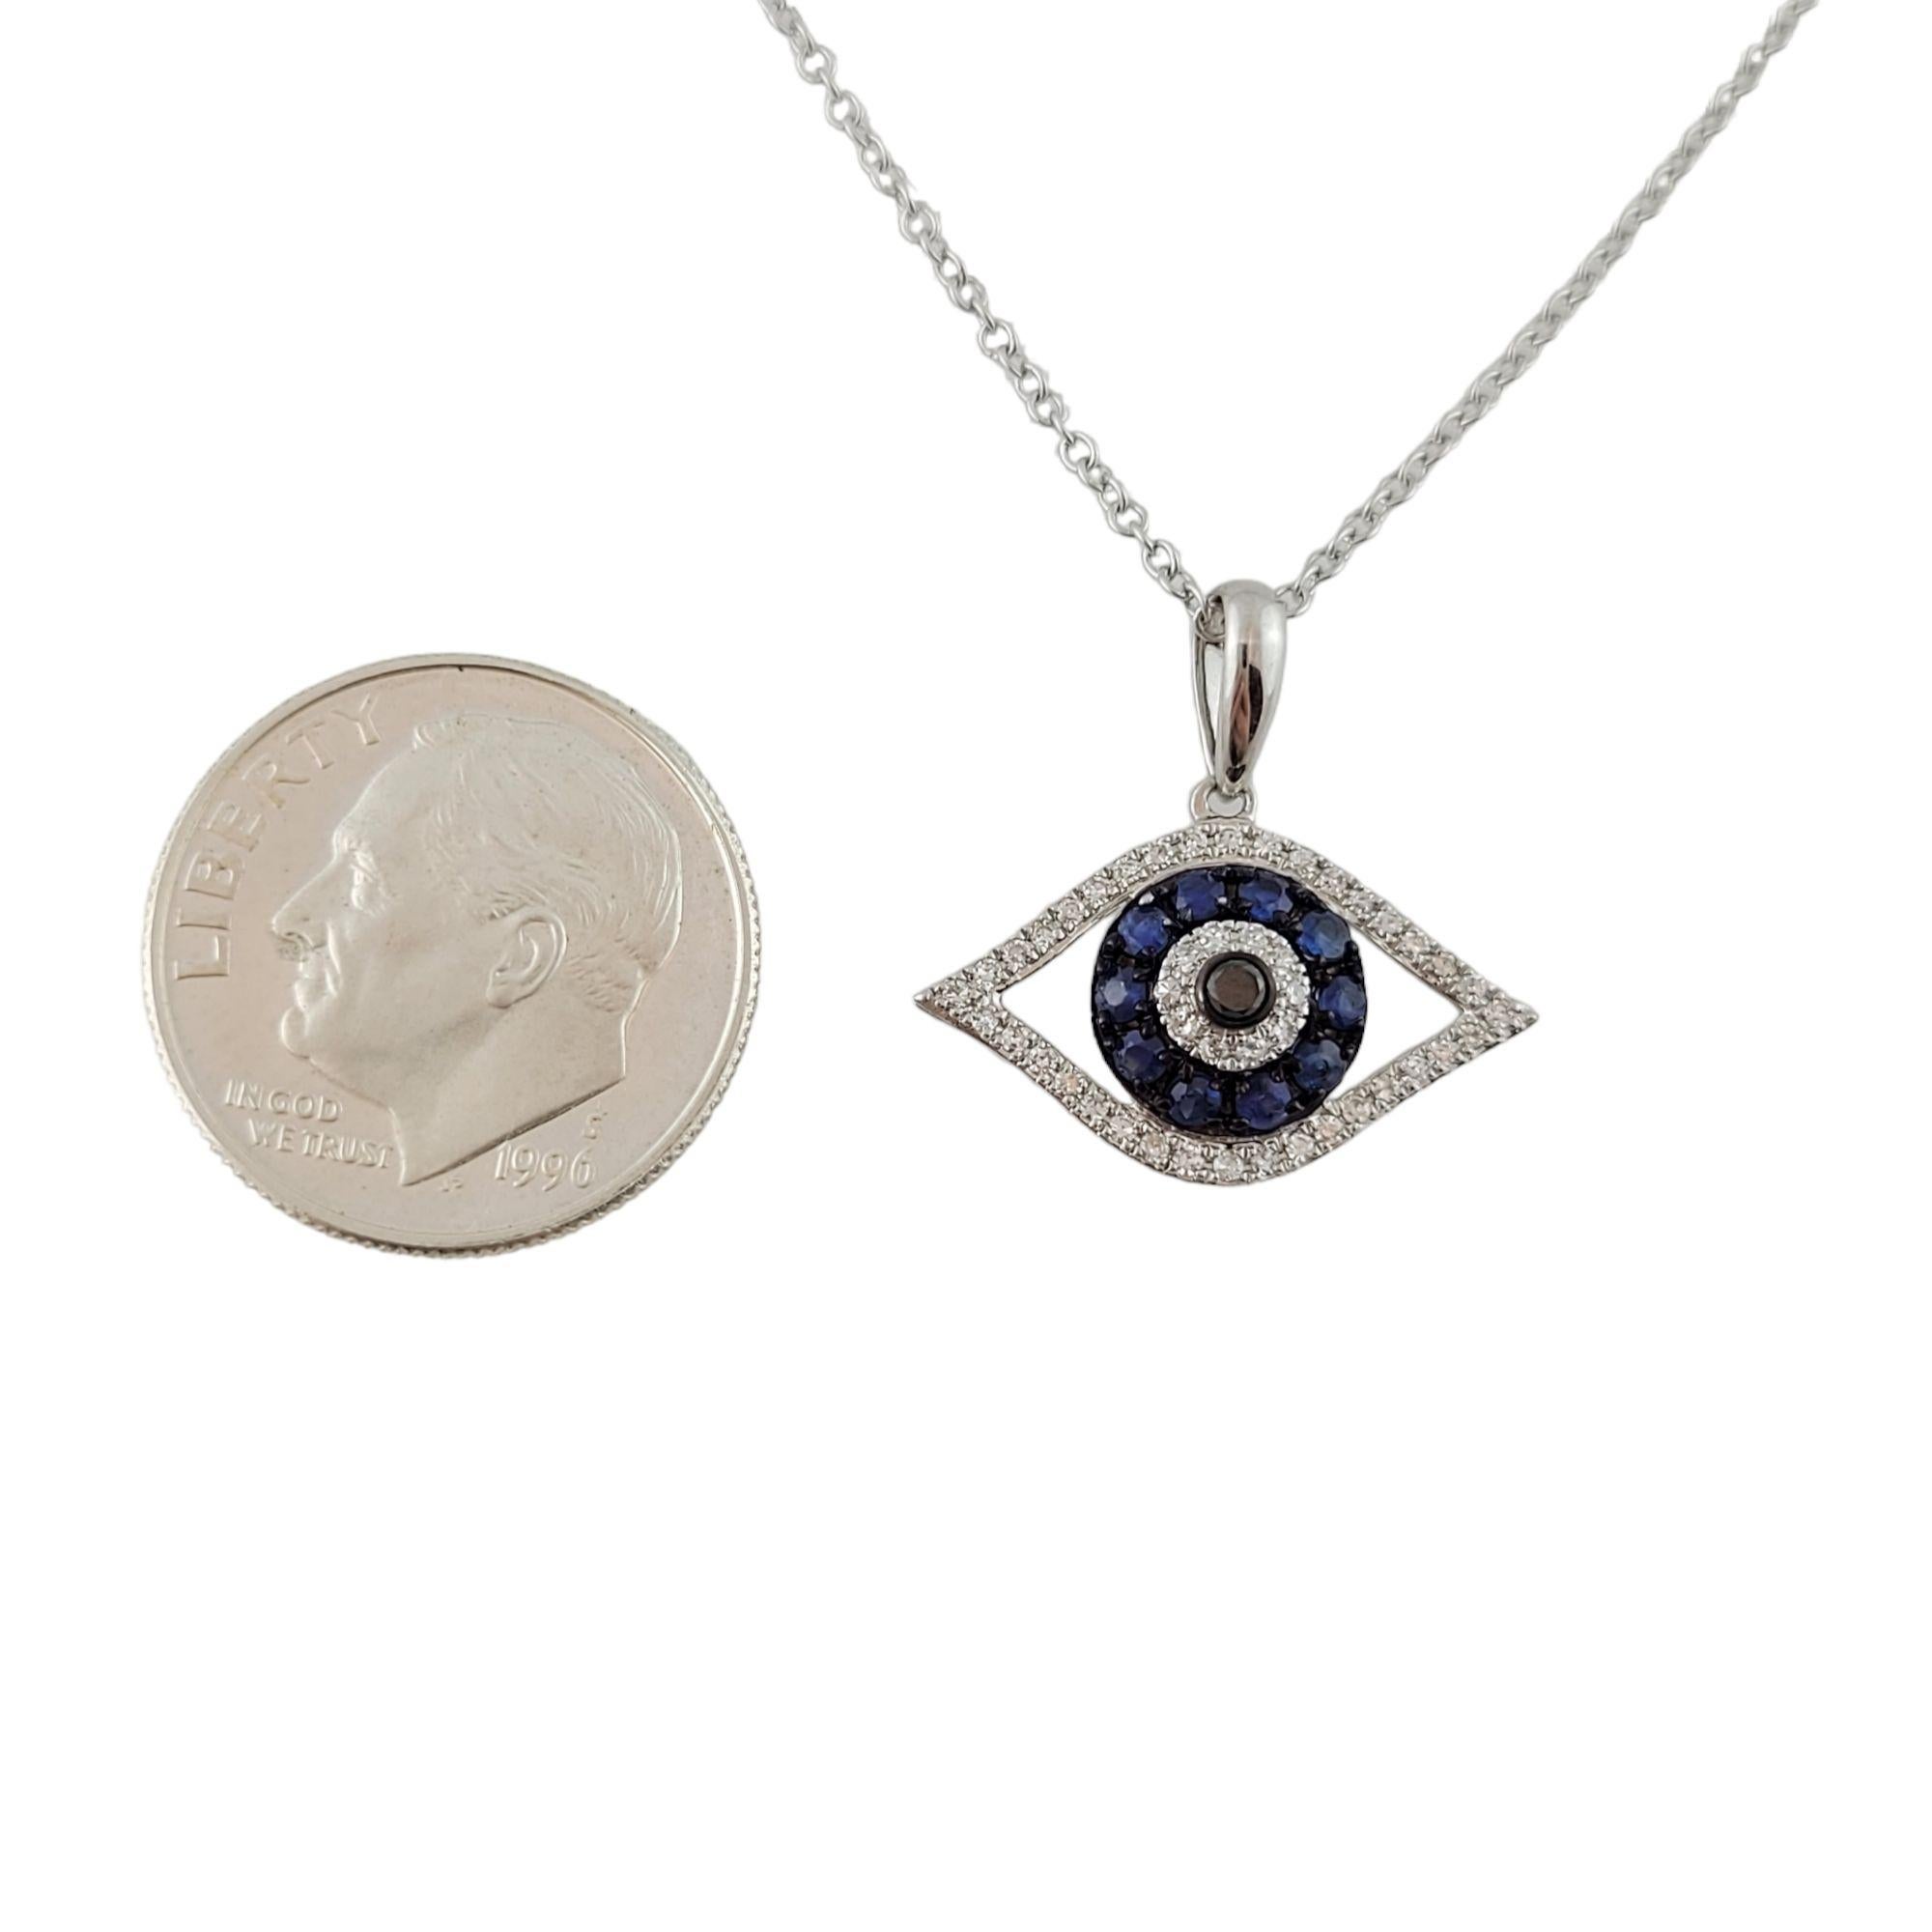 Vintage 14K White Gold Effy Chain and Diamond Sapphire Eye Pendant

46 gorgeous single cut diamonds and 11 blue sapphires embedded in 14K white gold to represent an eye paired with a beautiful 14k white gold Effy chain!

Diamond weight: .28